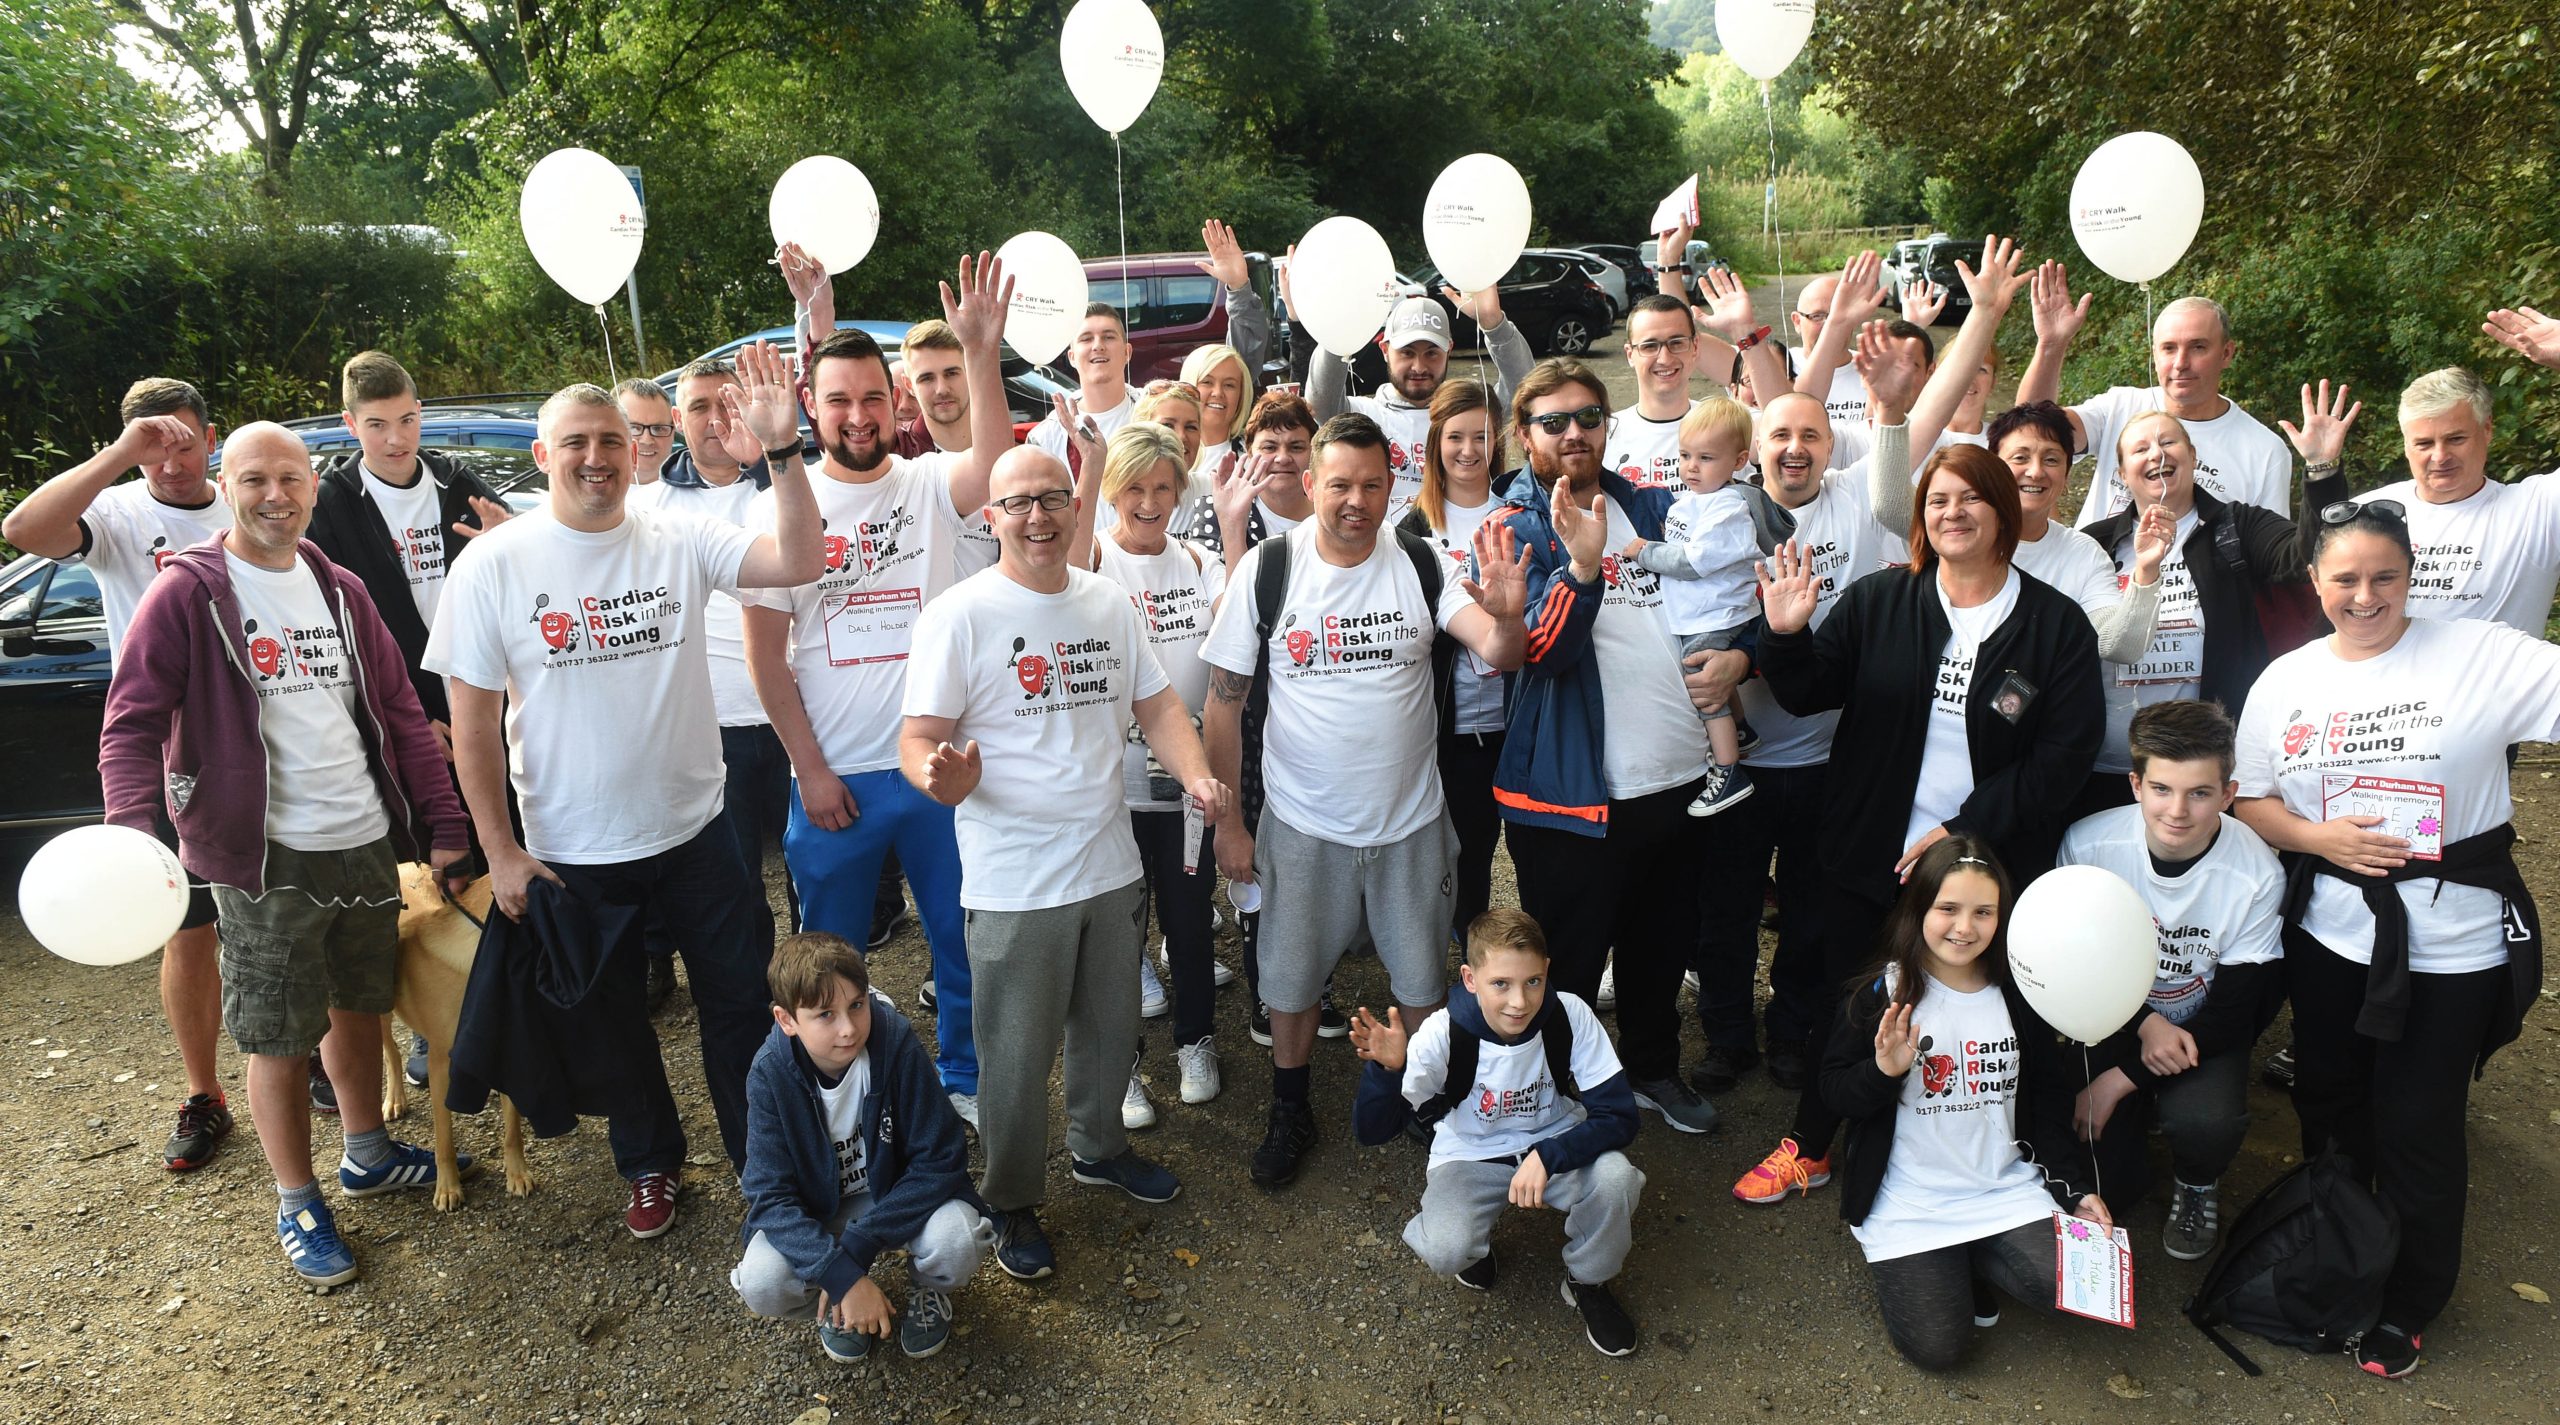 The Annual CRY (Cardiac Risk in the Young) charity walk took place on Saturday in Durham starting from the Rowing Club and going on a new route through the City. Lesley Holder (2nd right front ) with her family and friends walking in memory of son Dale Holder 01/10/16 Pic Doug Moody Photography